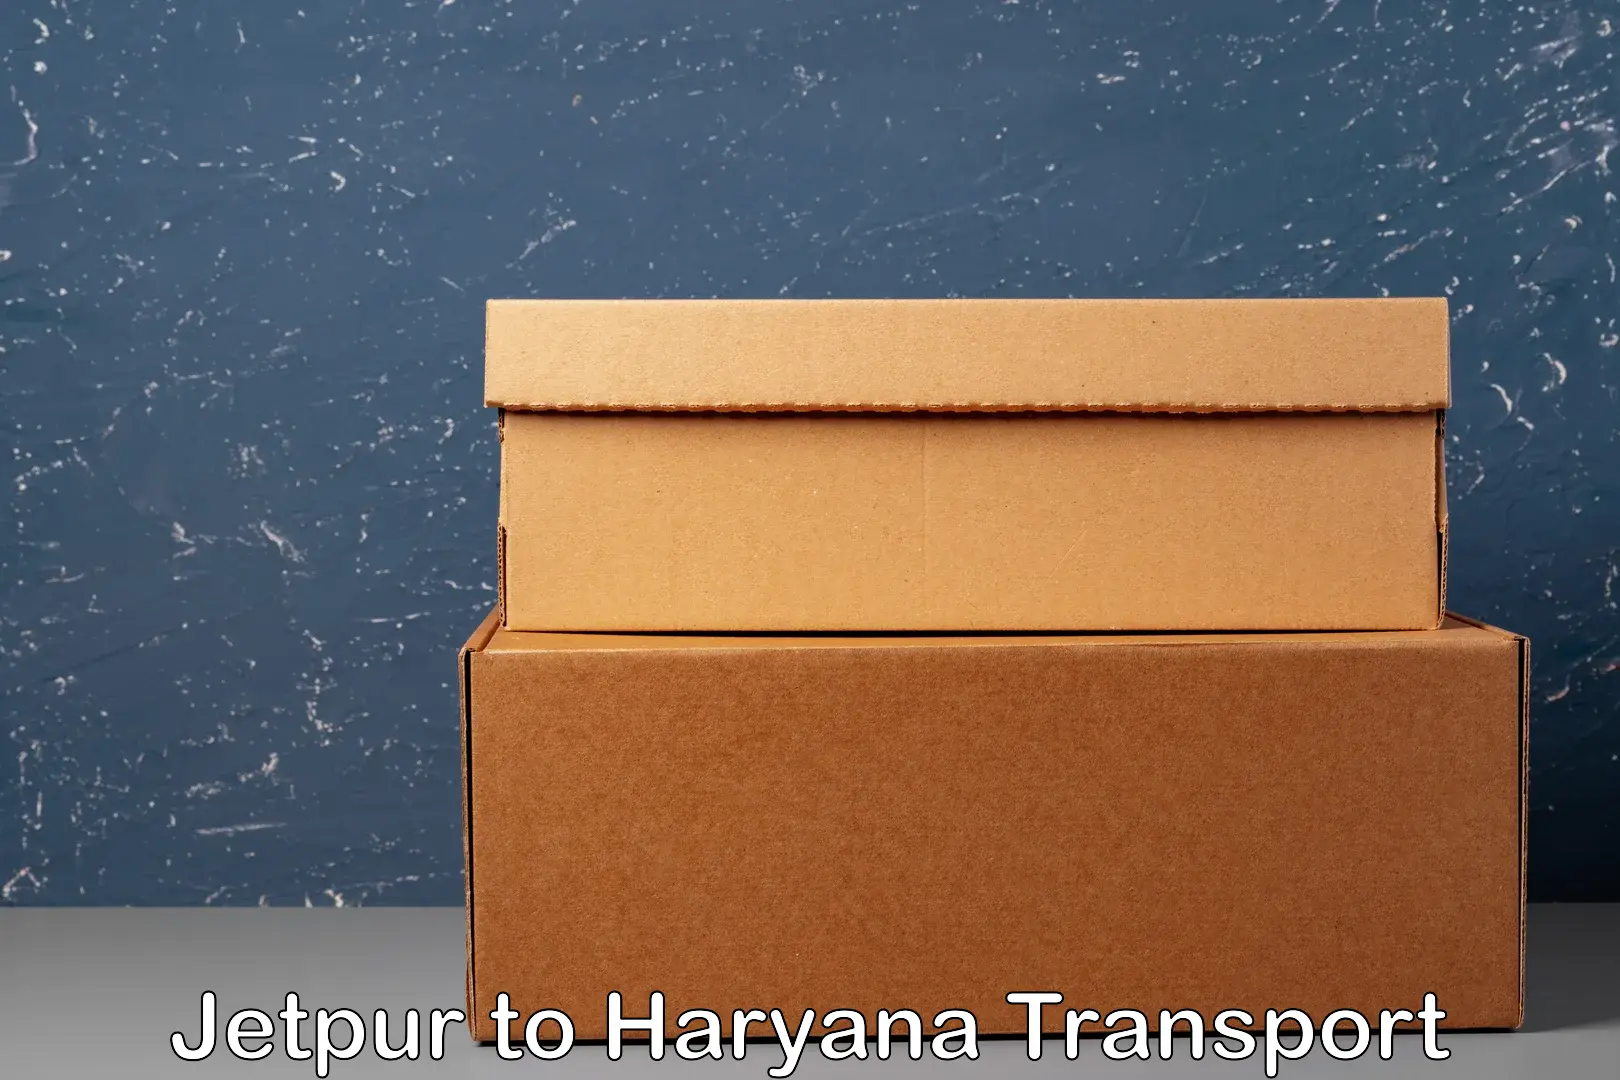 Daily parcel service transport Jetpur to Haryana